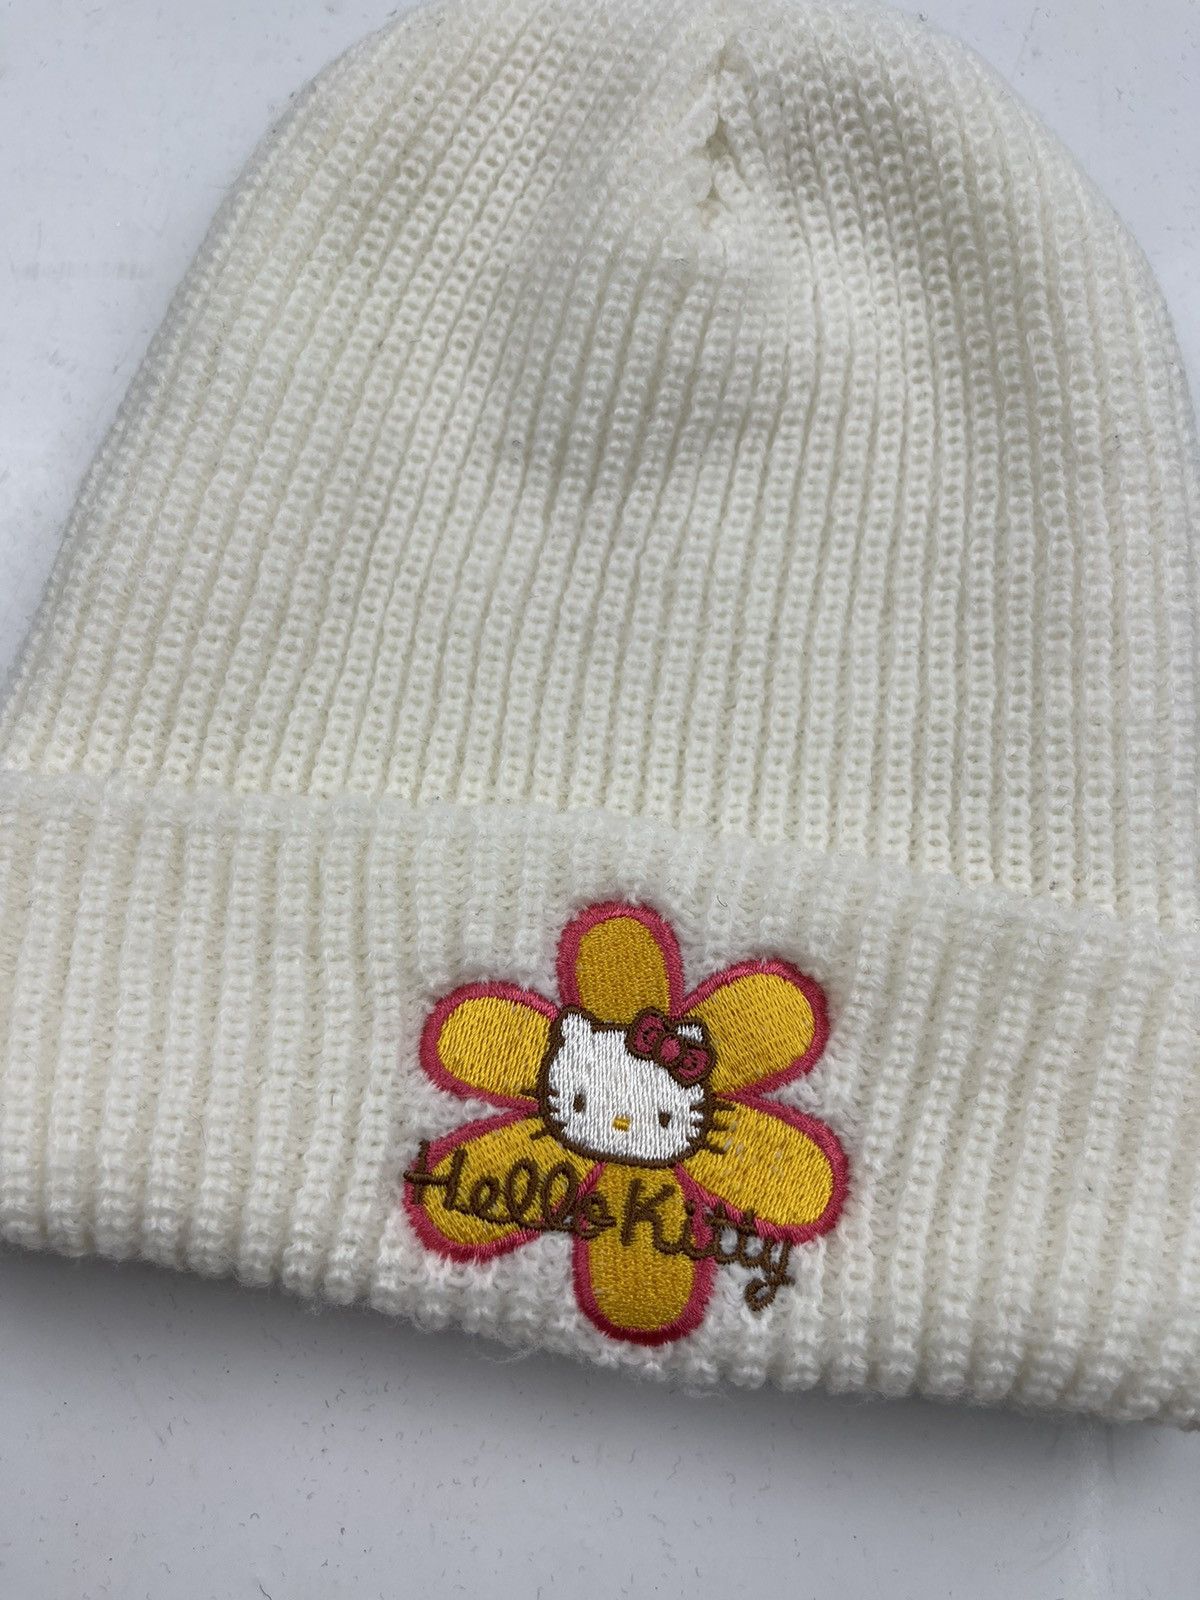 Japanese Brand - made in canada hello kitty beanie hat snow cap tc14 - 3